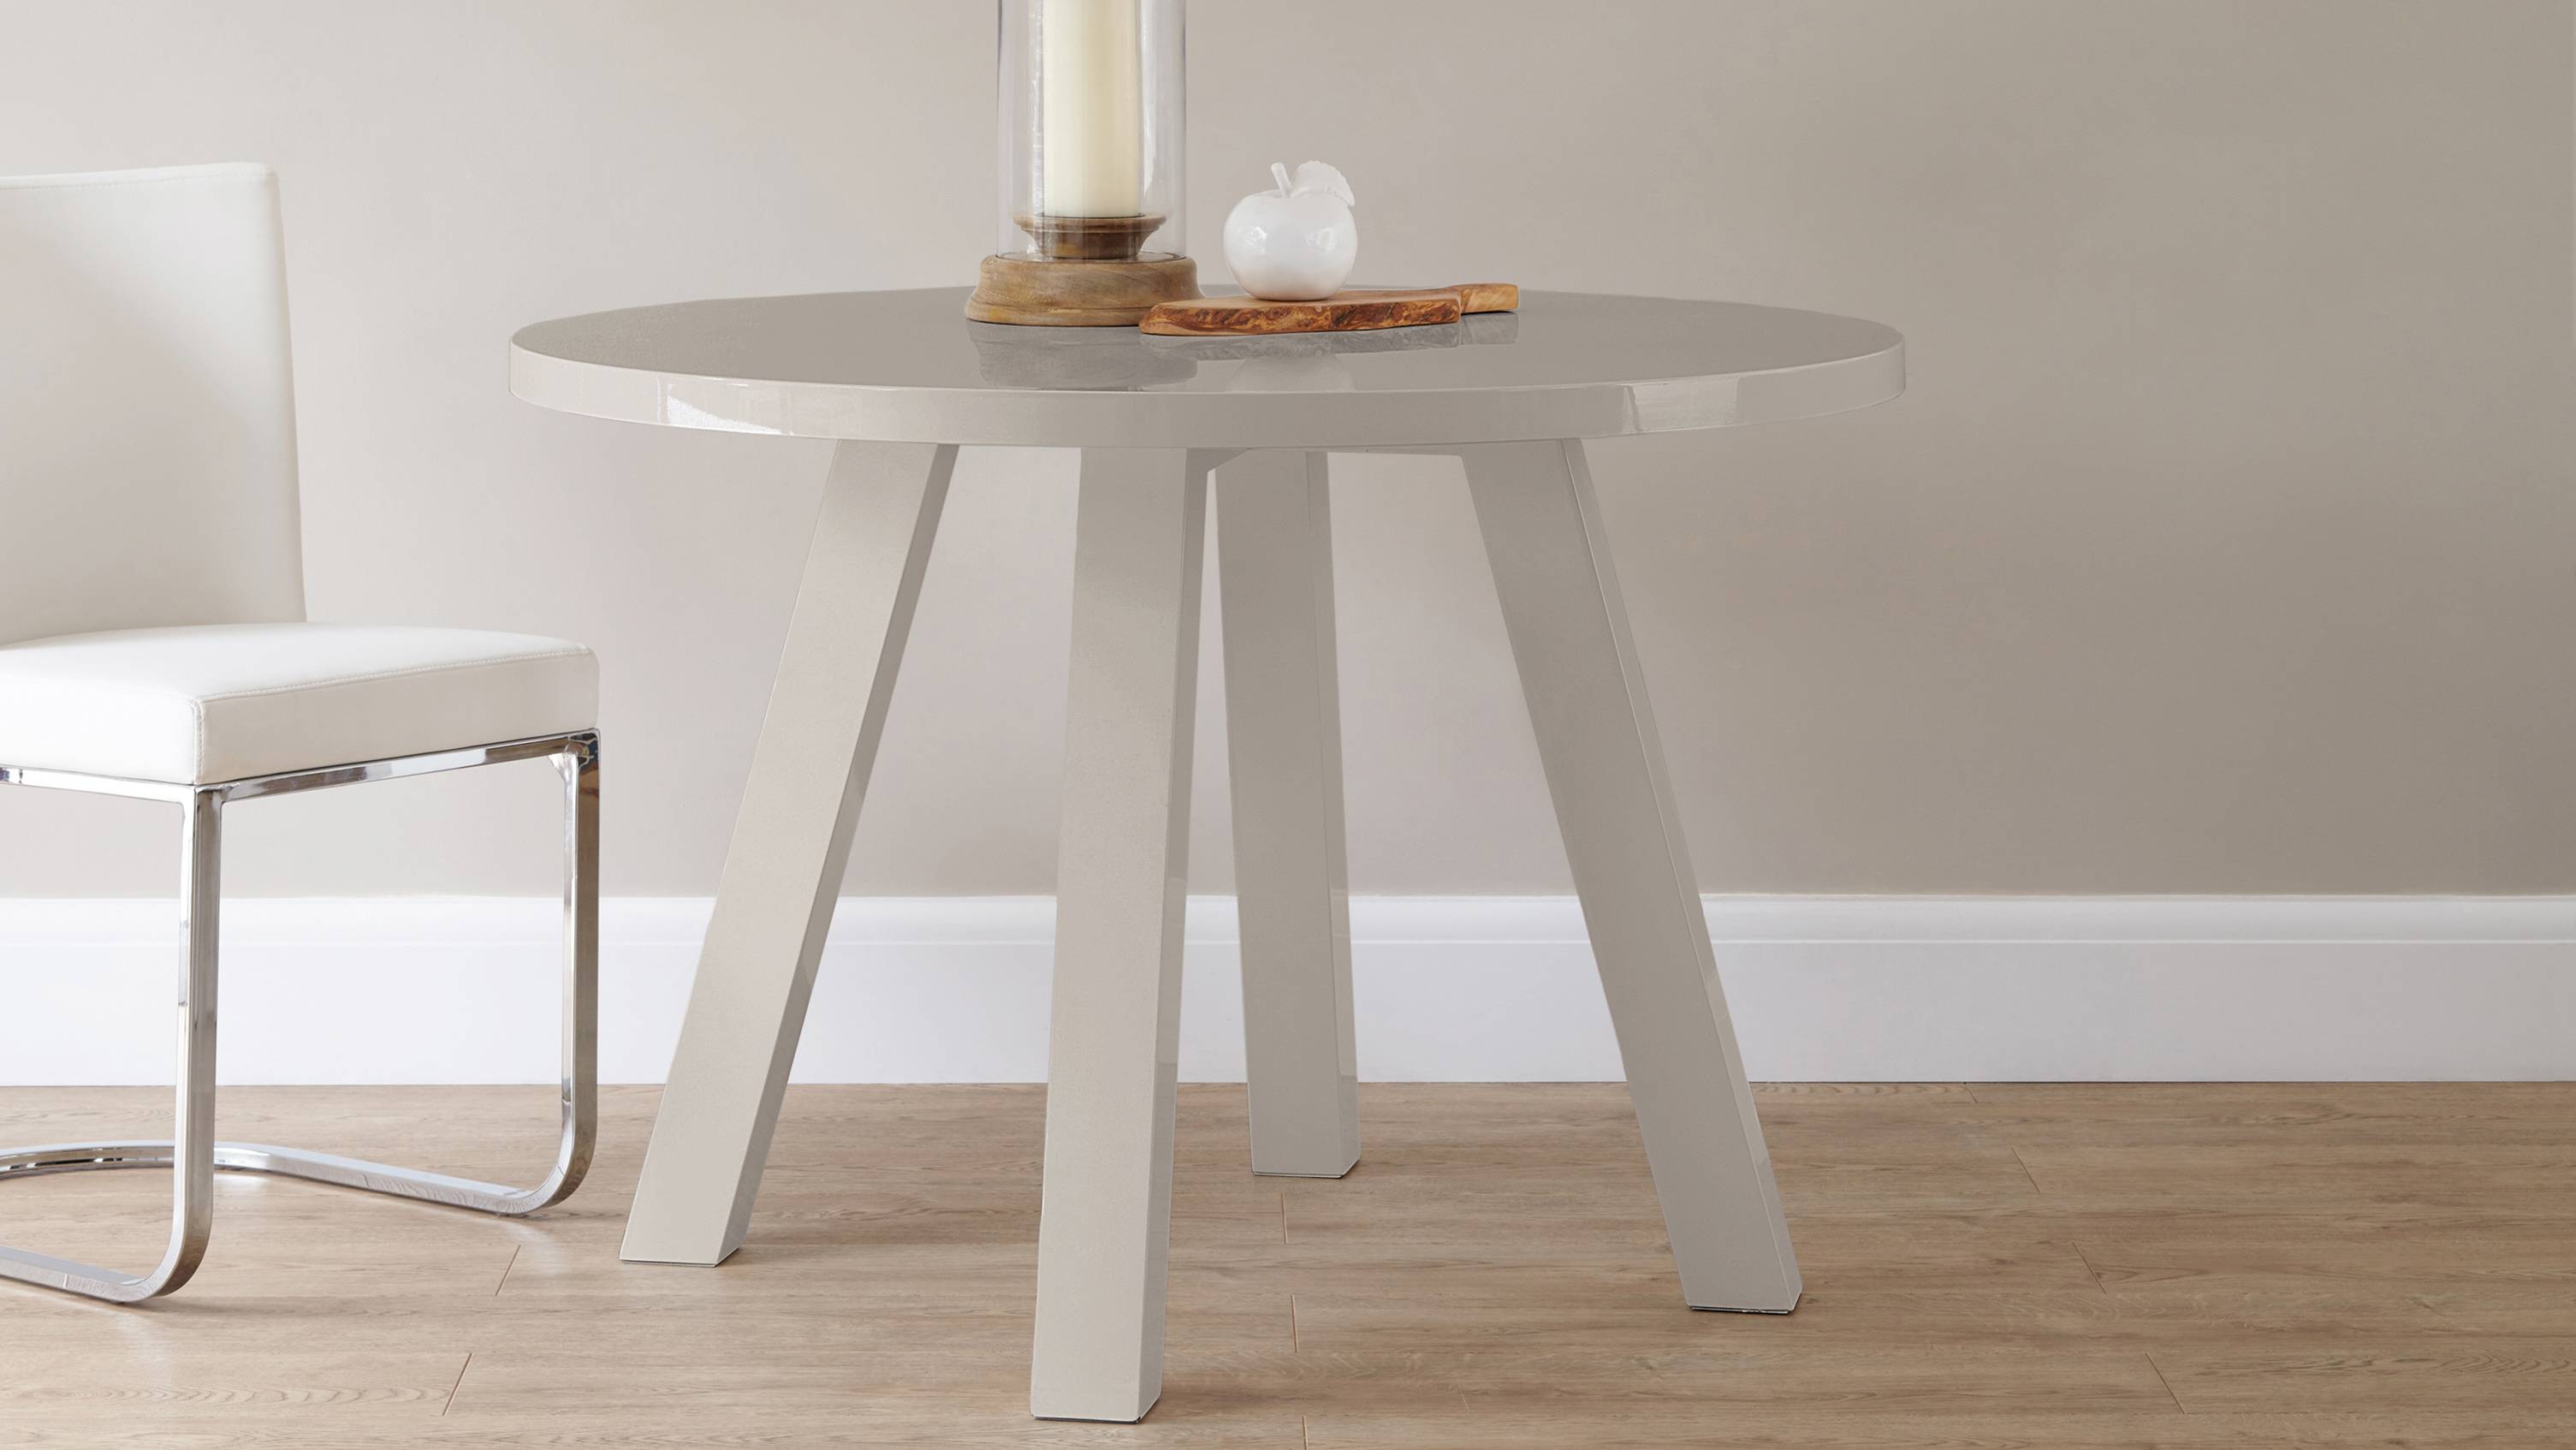 Grey gloss round four seater dining table Exclusively Danetti with Julia Kendell Range